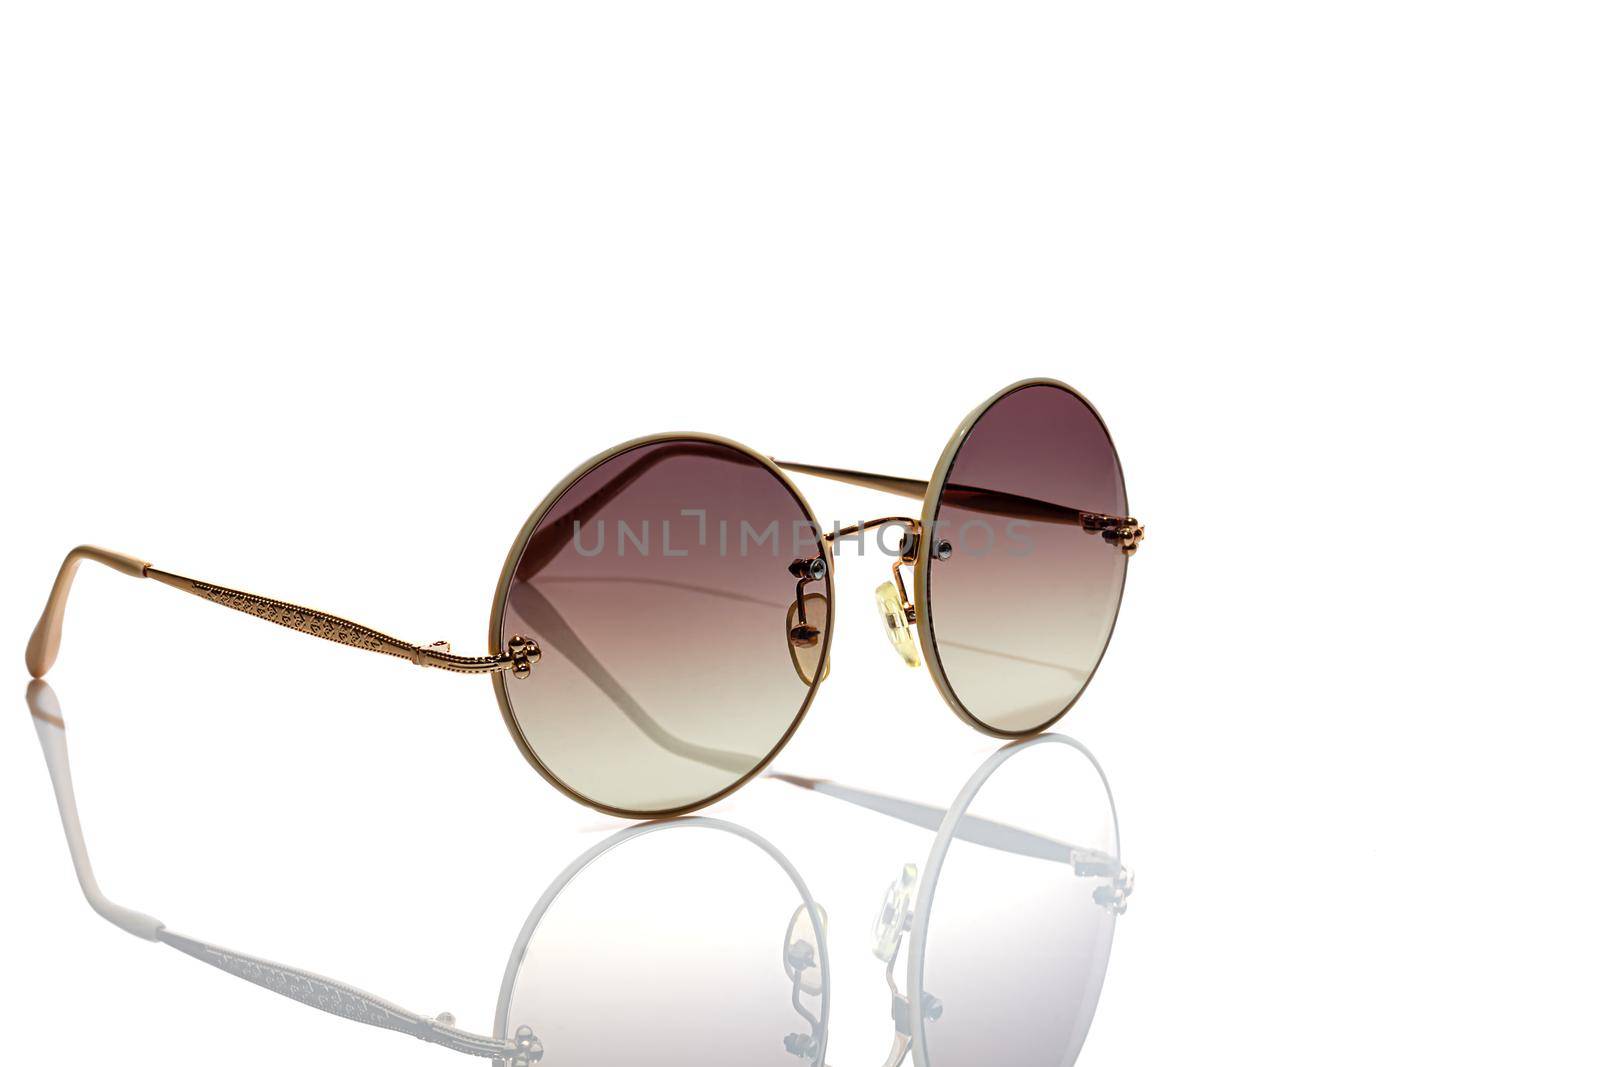 Protective glasses from the sun on a white background. Isolate. Healthy eyes. by klimatis019